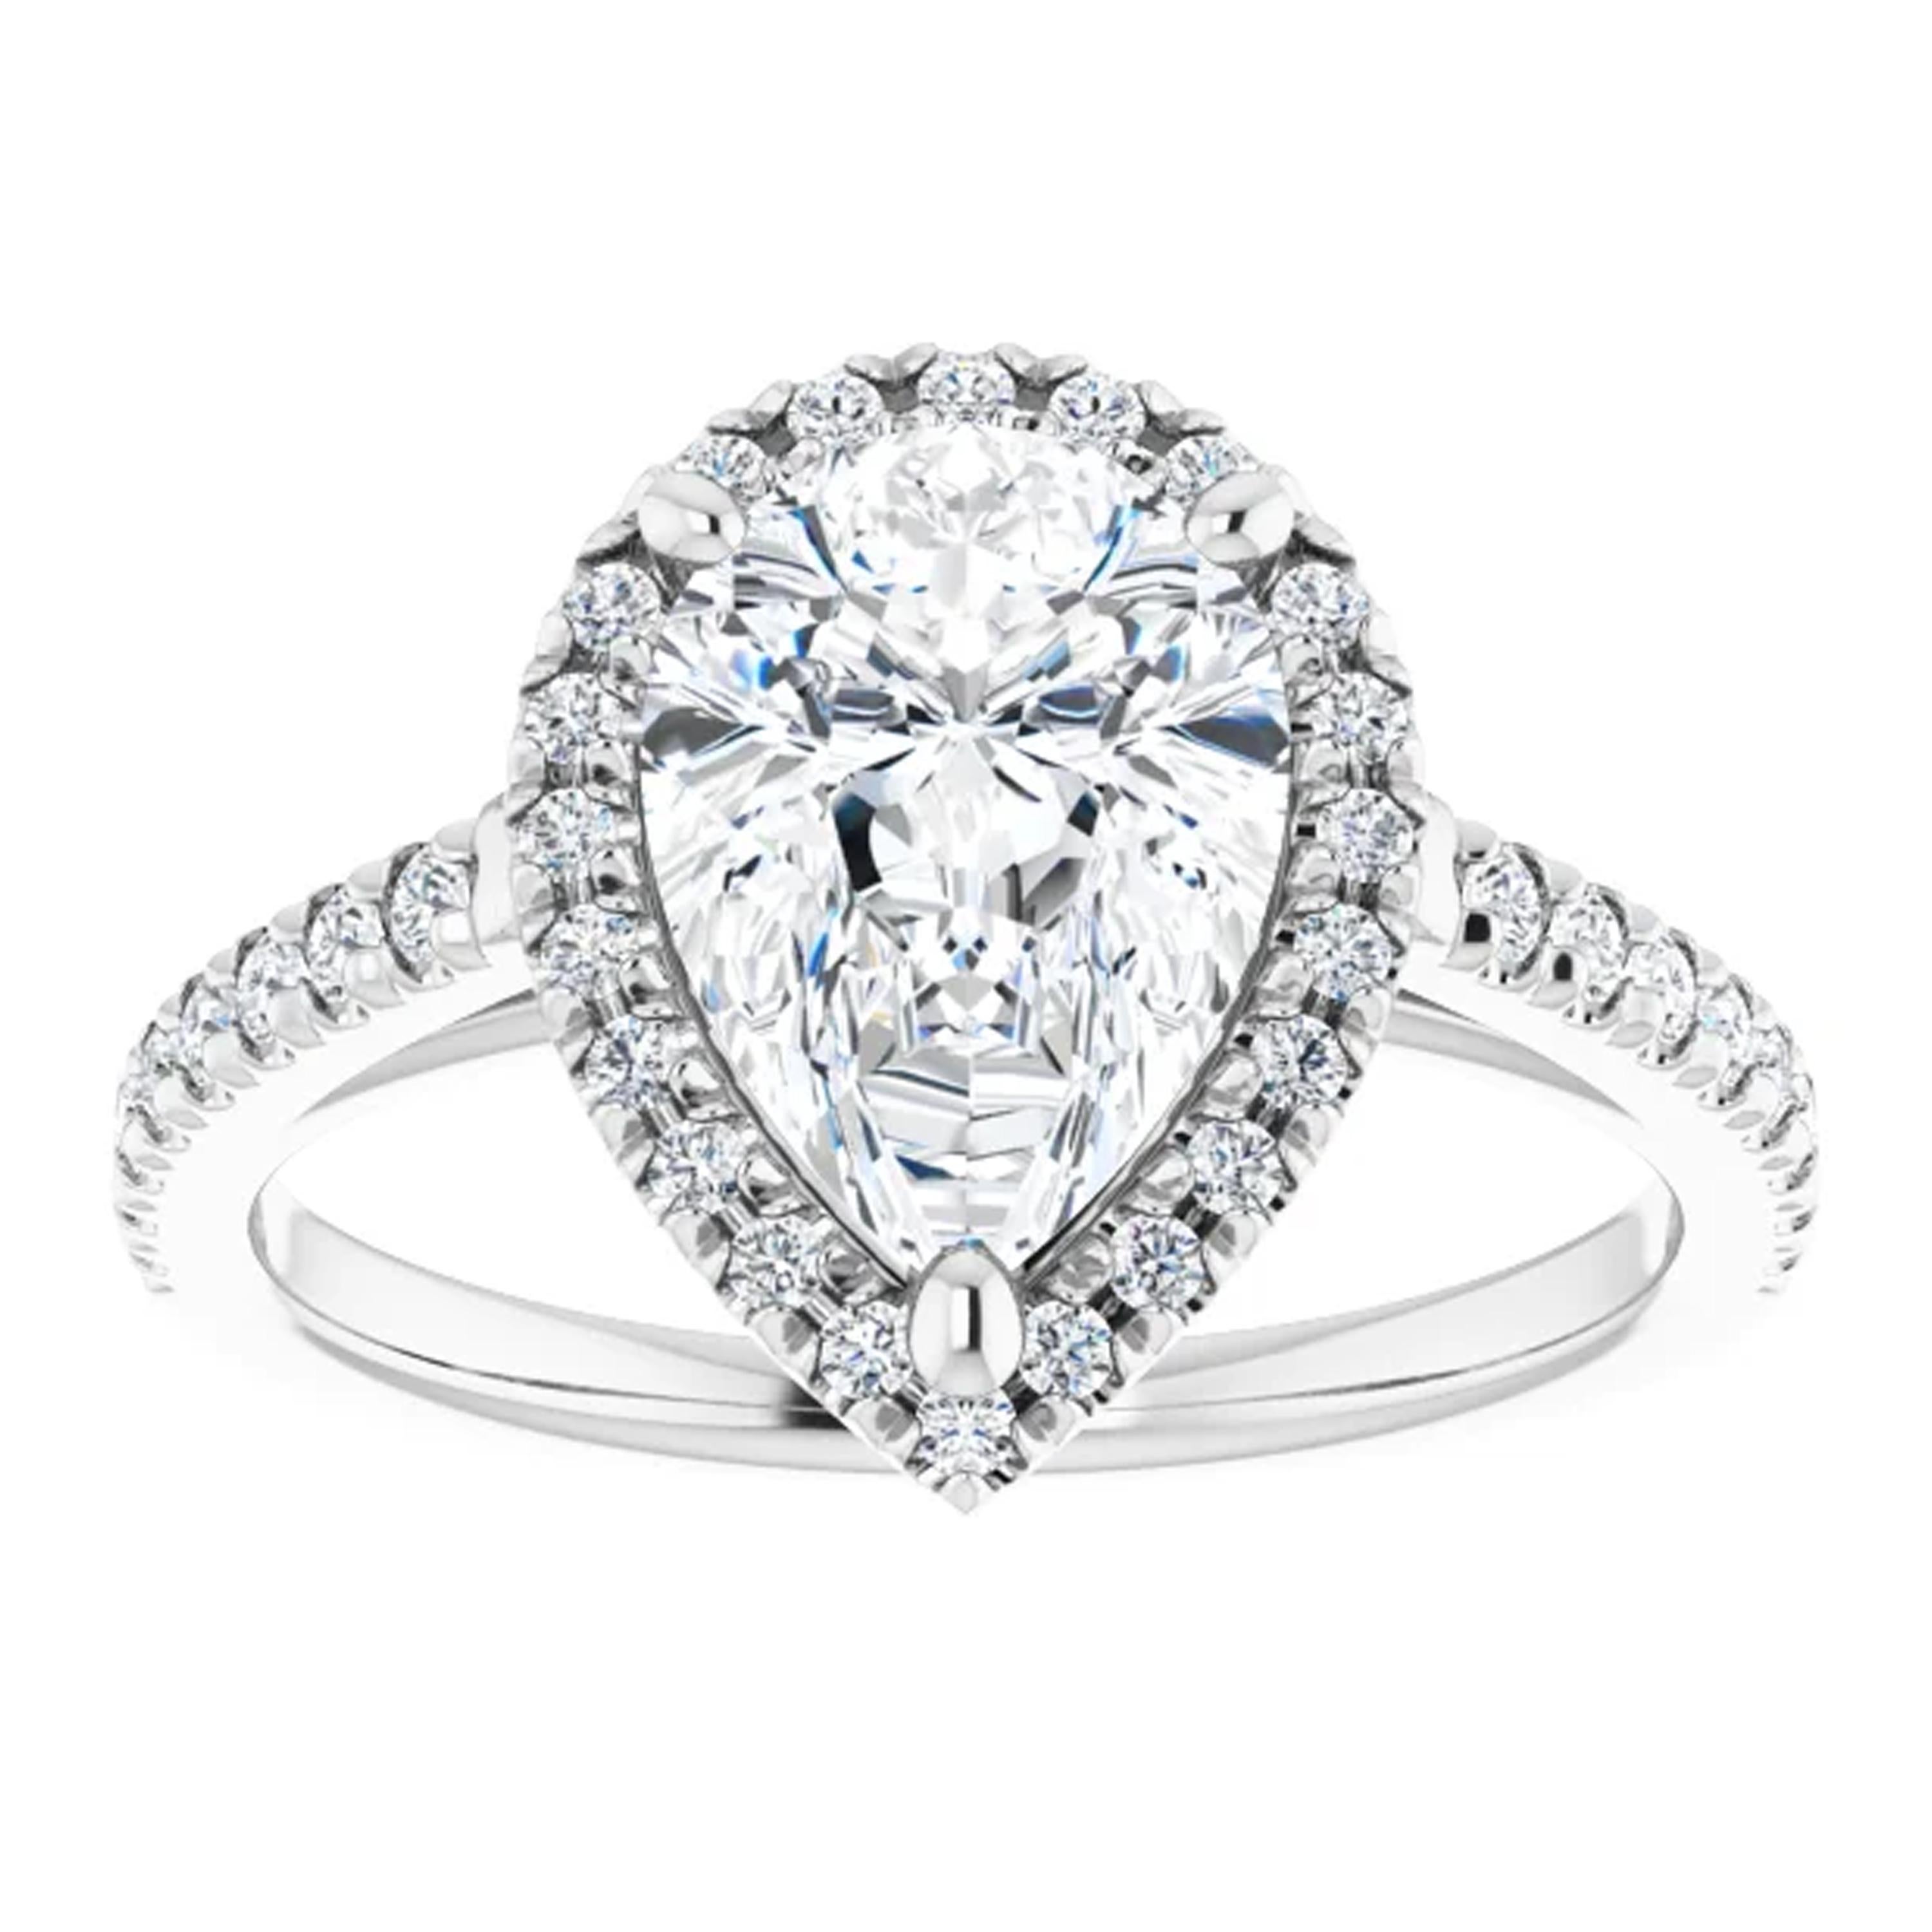 Amplified by a halo of French pave shimmering diamonds, the pear shape GIA certified center stone shines with brilliance. Achieving maximum light performance, French pave setting exposes diamonds from all corners. Seal your eternal love, devotion